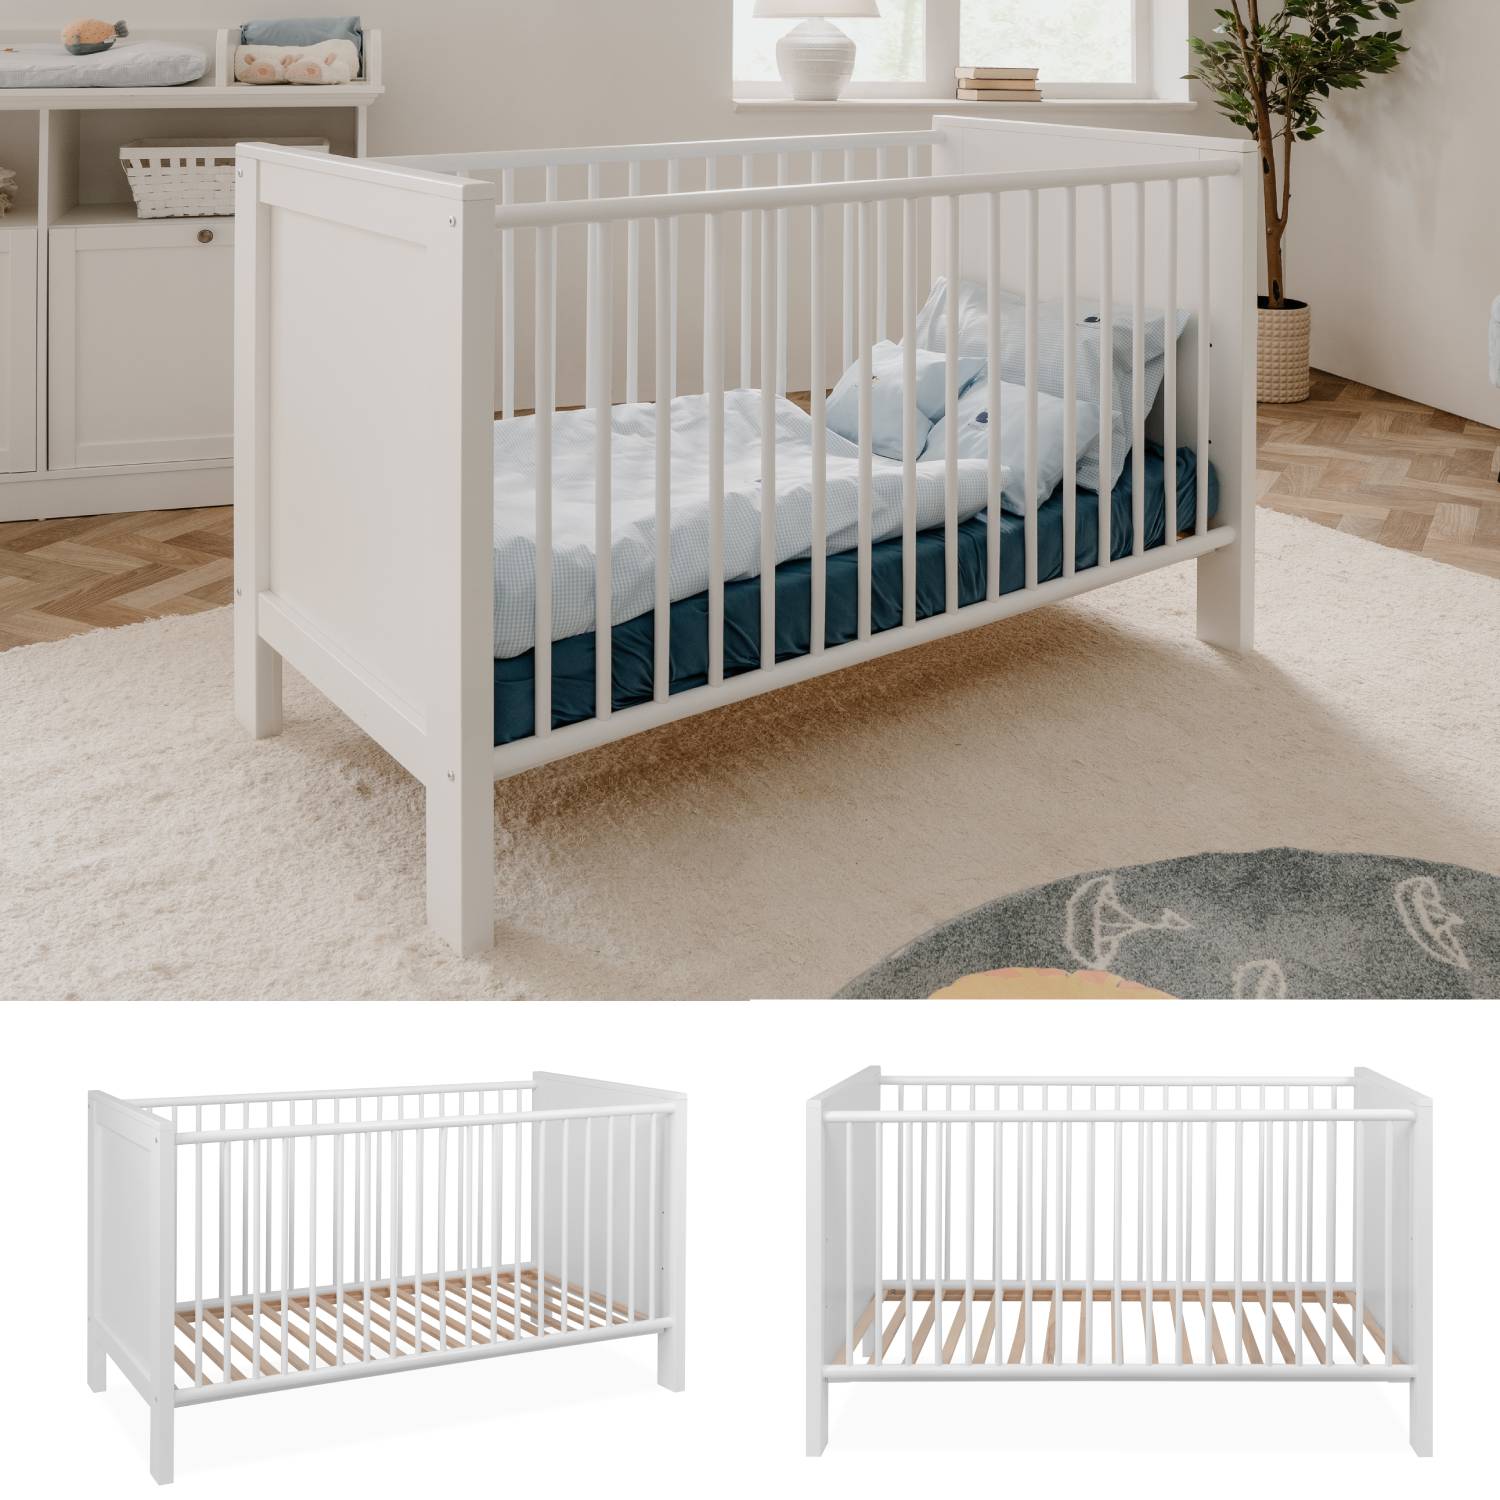 Baby Bed Cot Wooden Bed 70x140 cm Infant Bed Childrens Bed Nursery